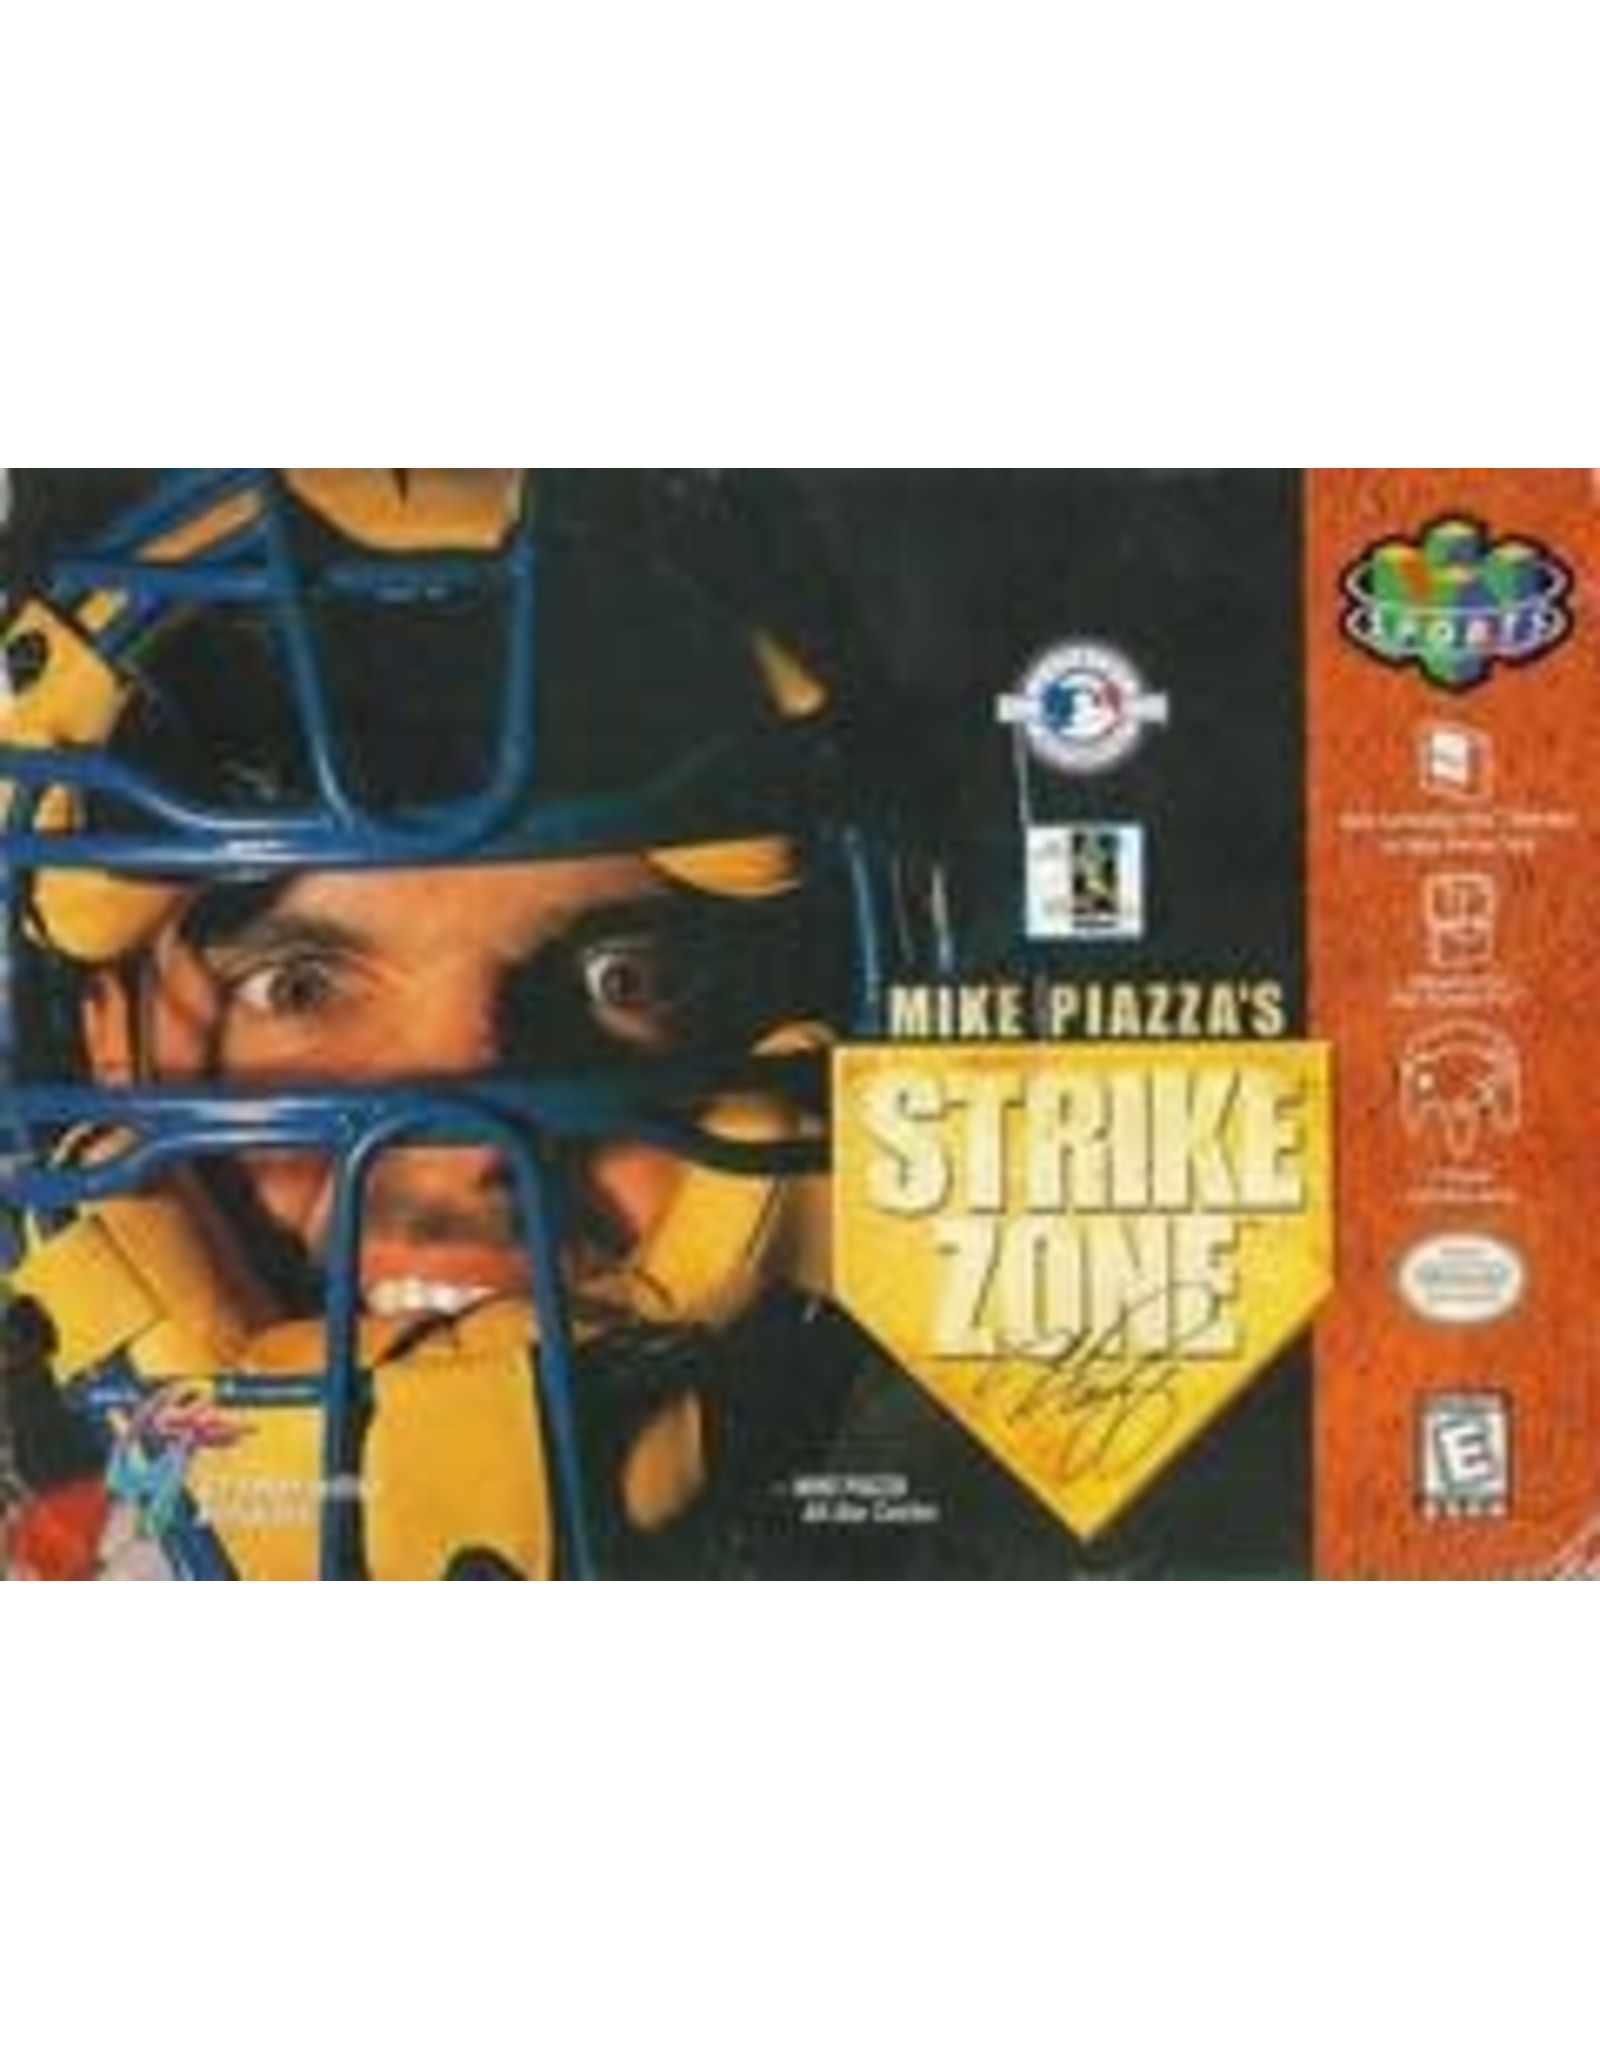 Nintendo 64 Mike Piazza's Strike Zone (Cart Only)